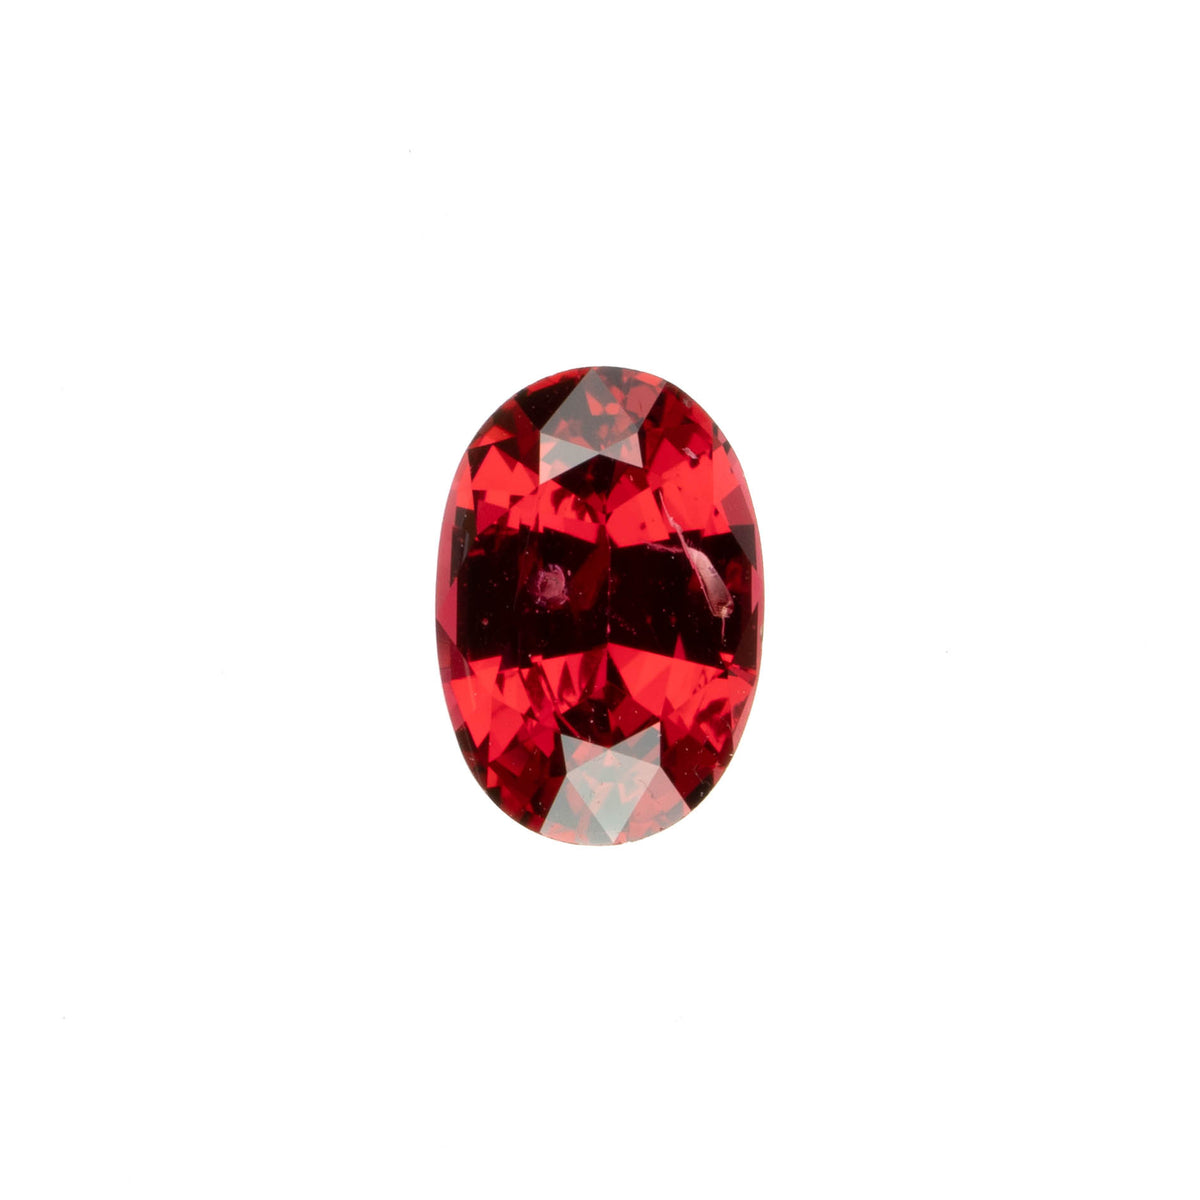 0.6ct Natural Vivid Red Spinel